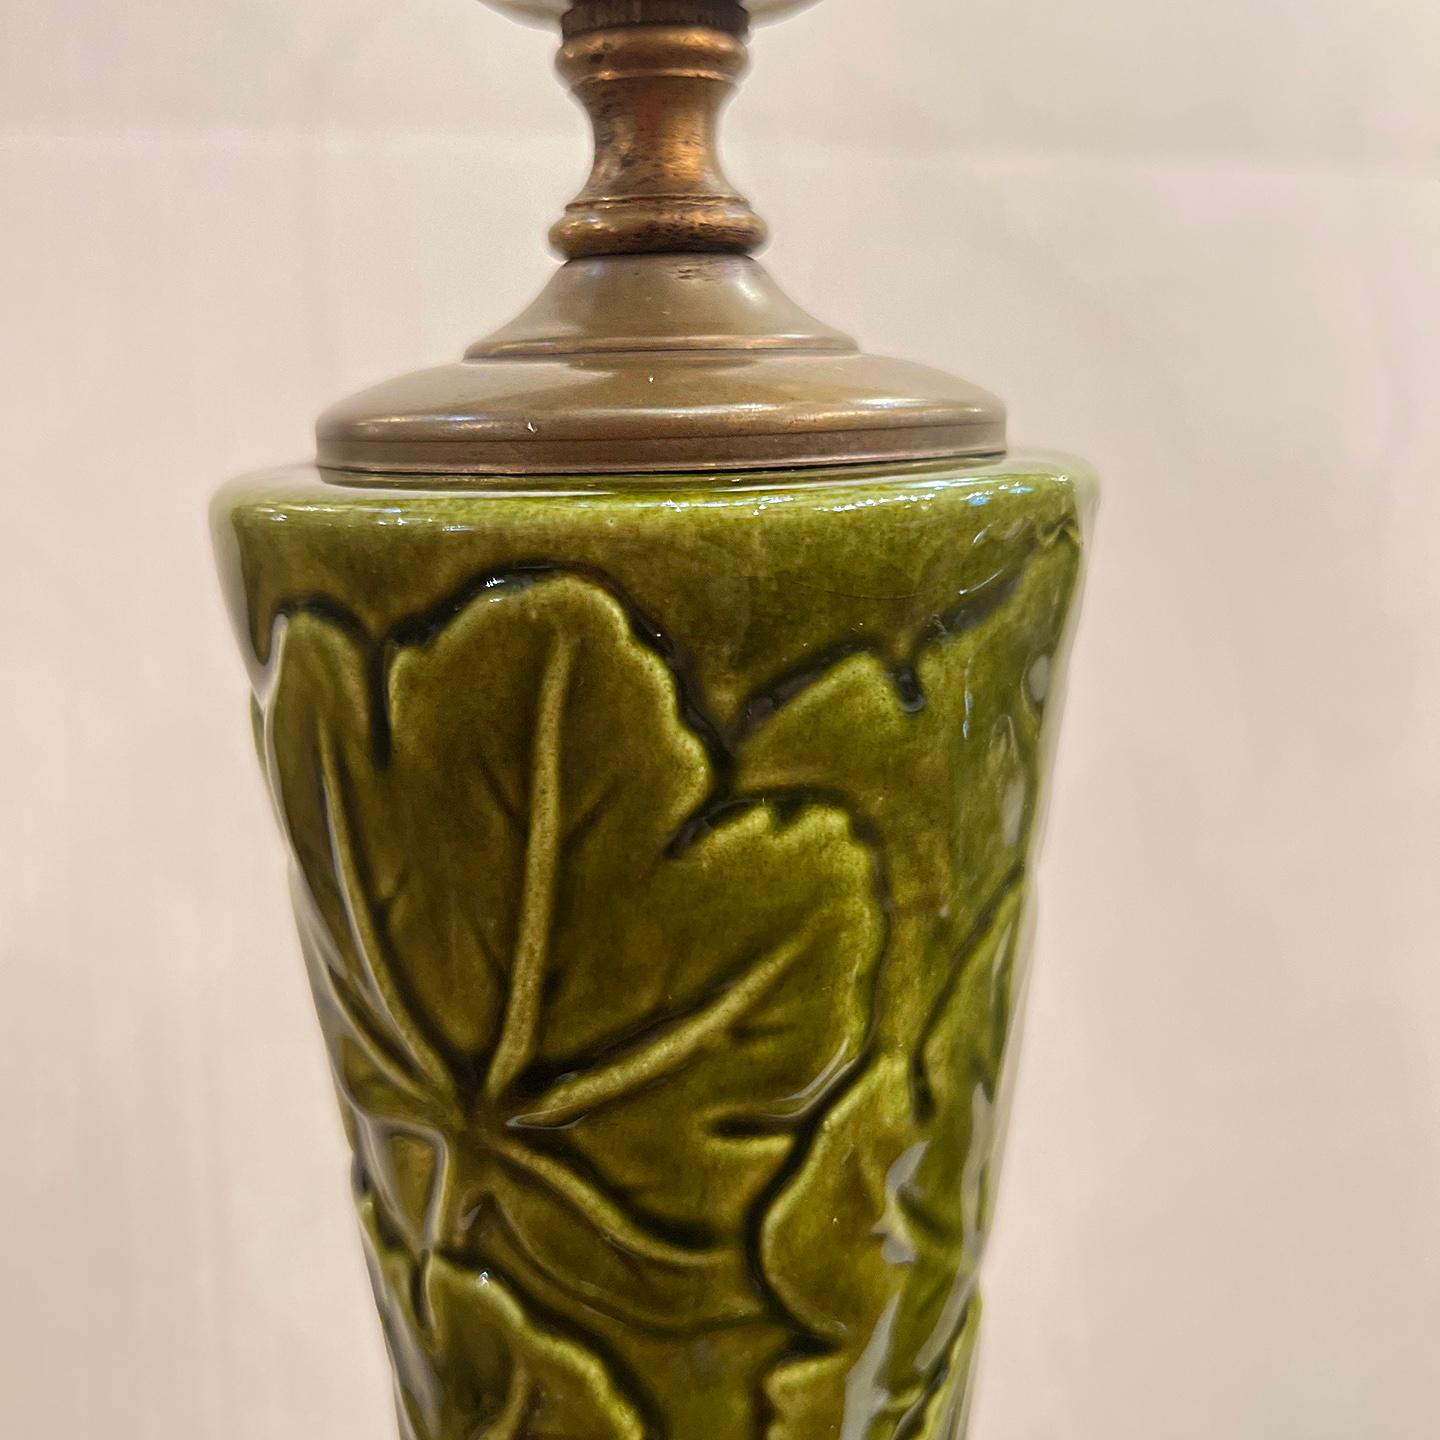 A pair of circa 1940s French Majolica porcelain in green glaze with foliage motif.

Measurements:
Height of body: 22